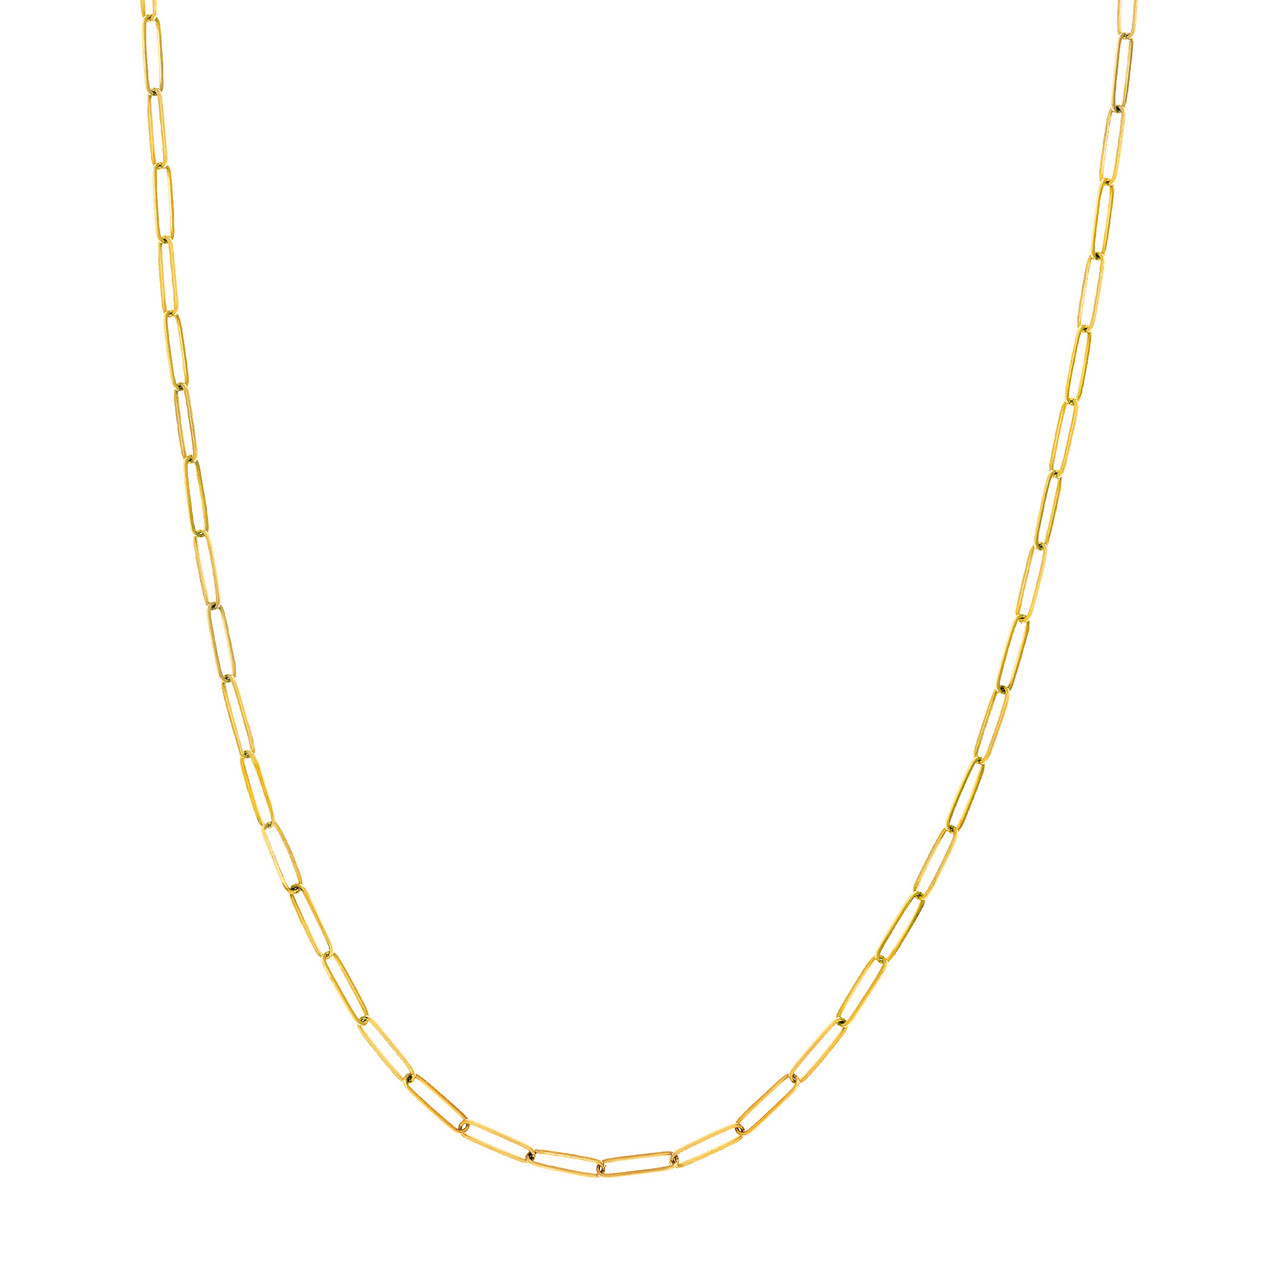 Yellow Gold Designer Long Link Chain Necklace 2.6mm l 18 inches